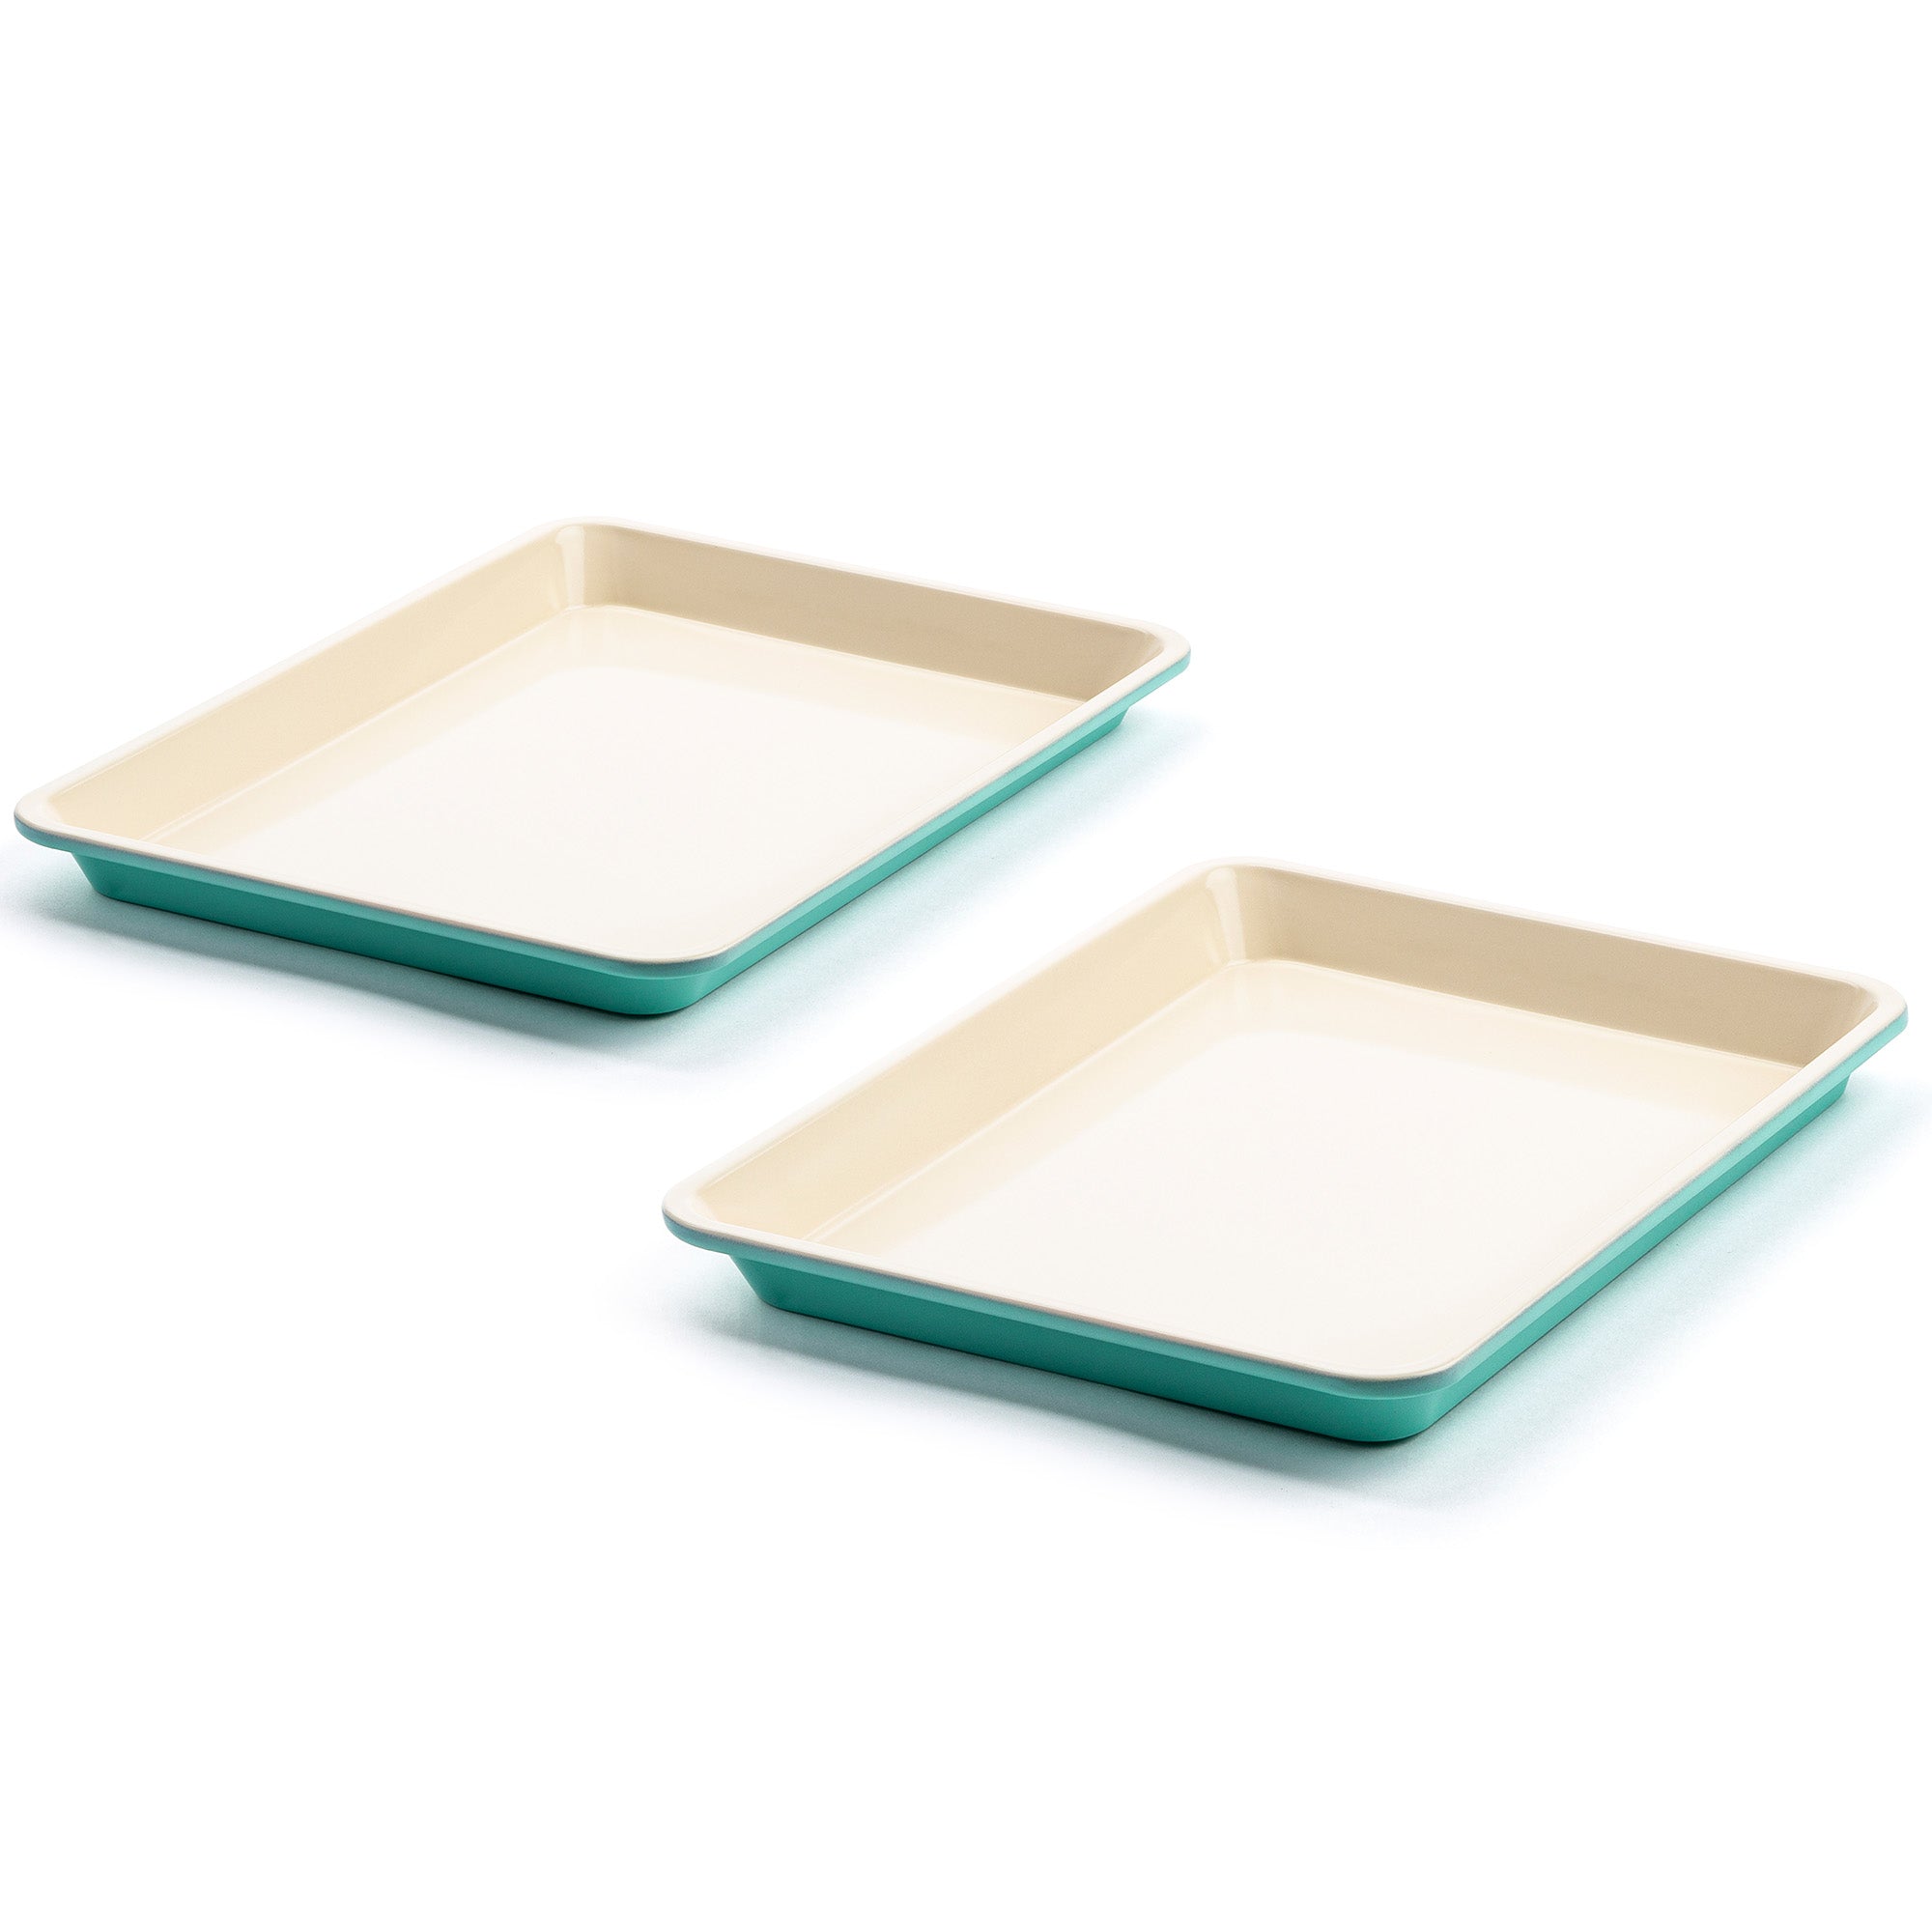 4 Pcs Food Serving Trays For Party Plastic Trays With Handles 13 X